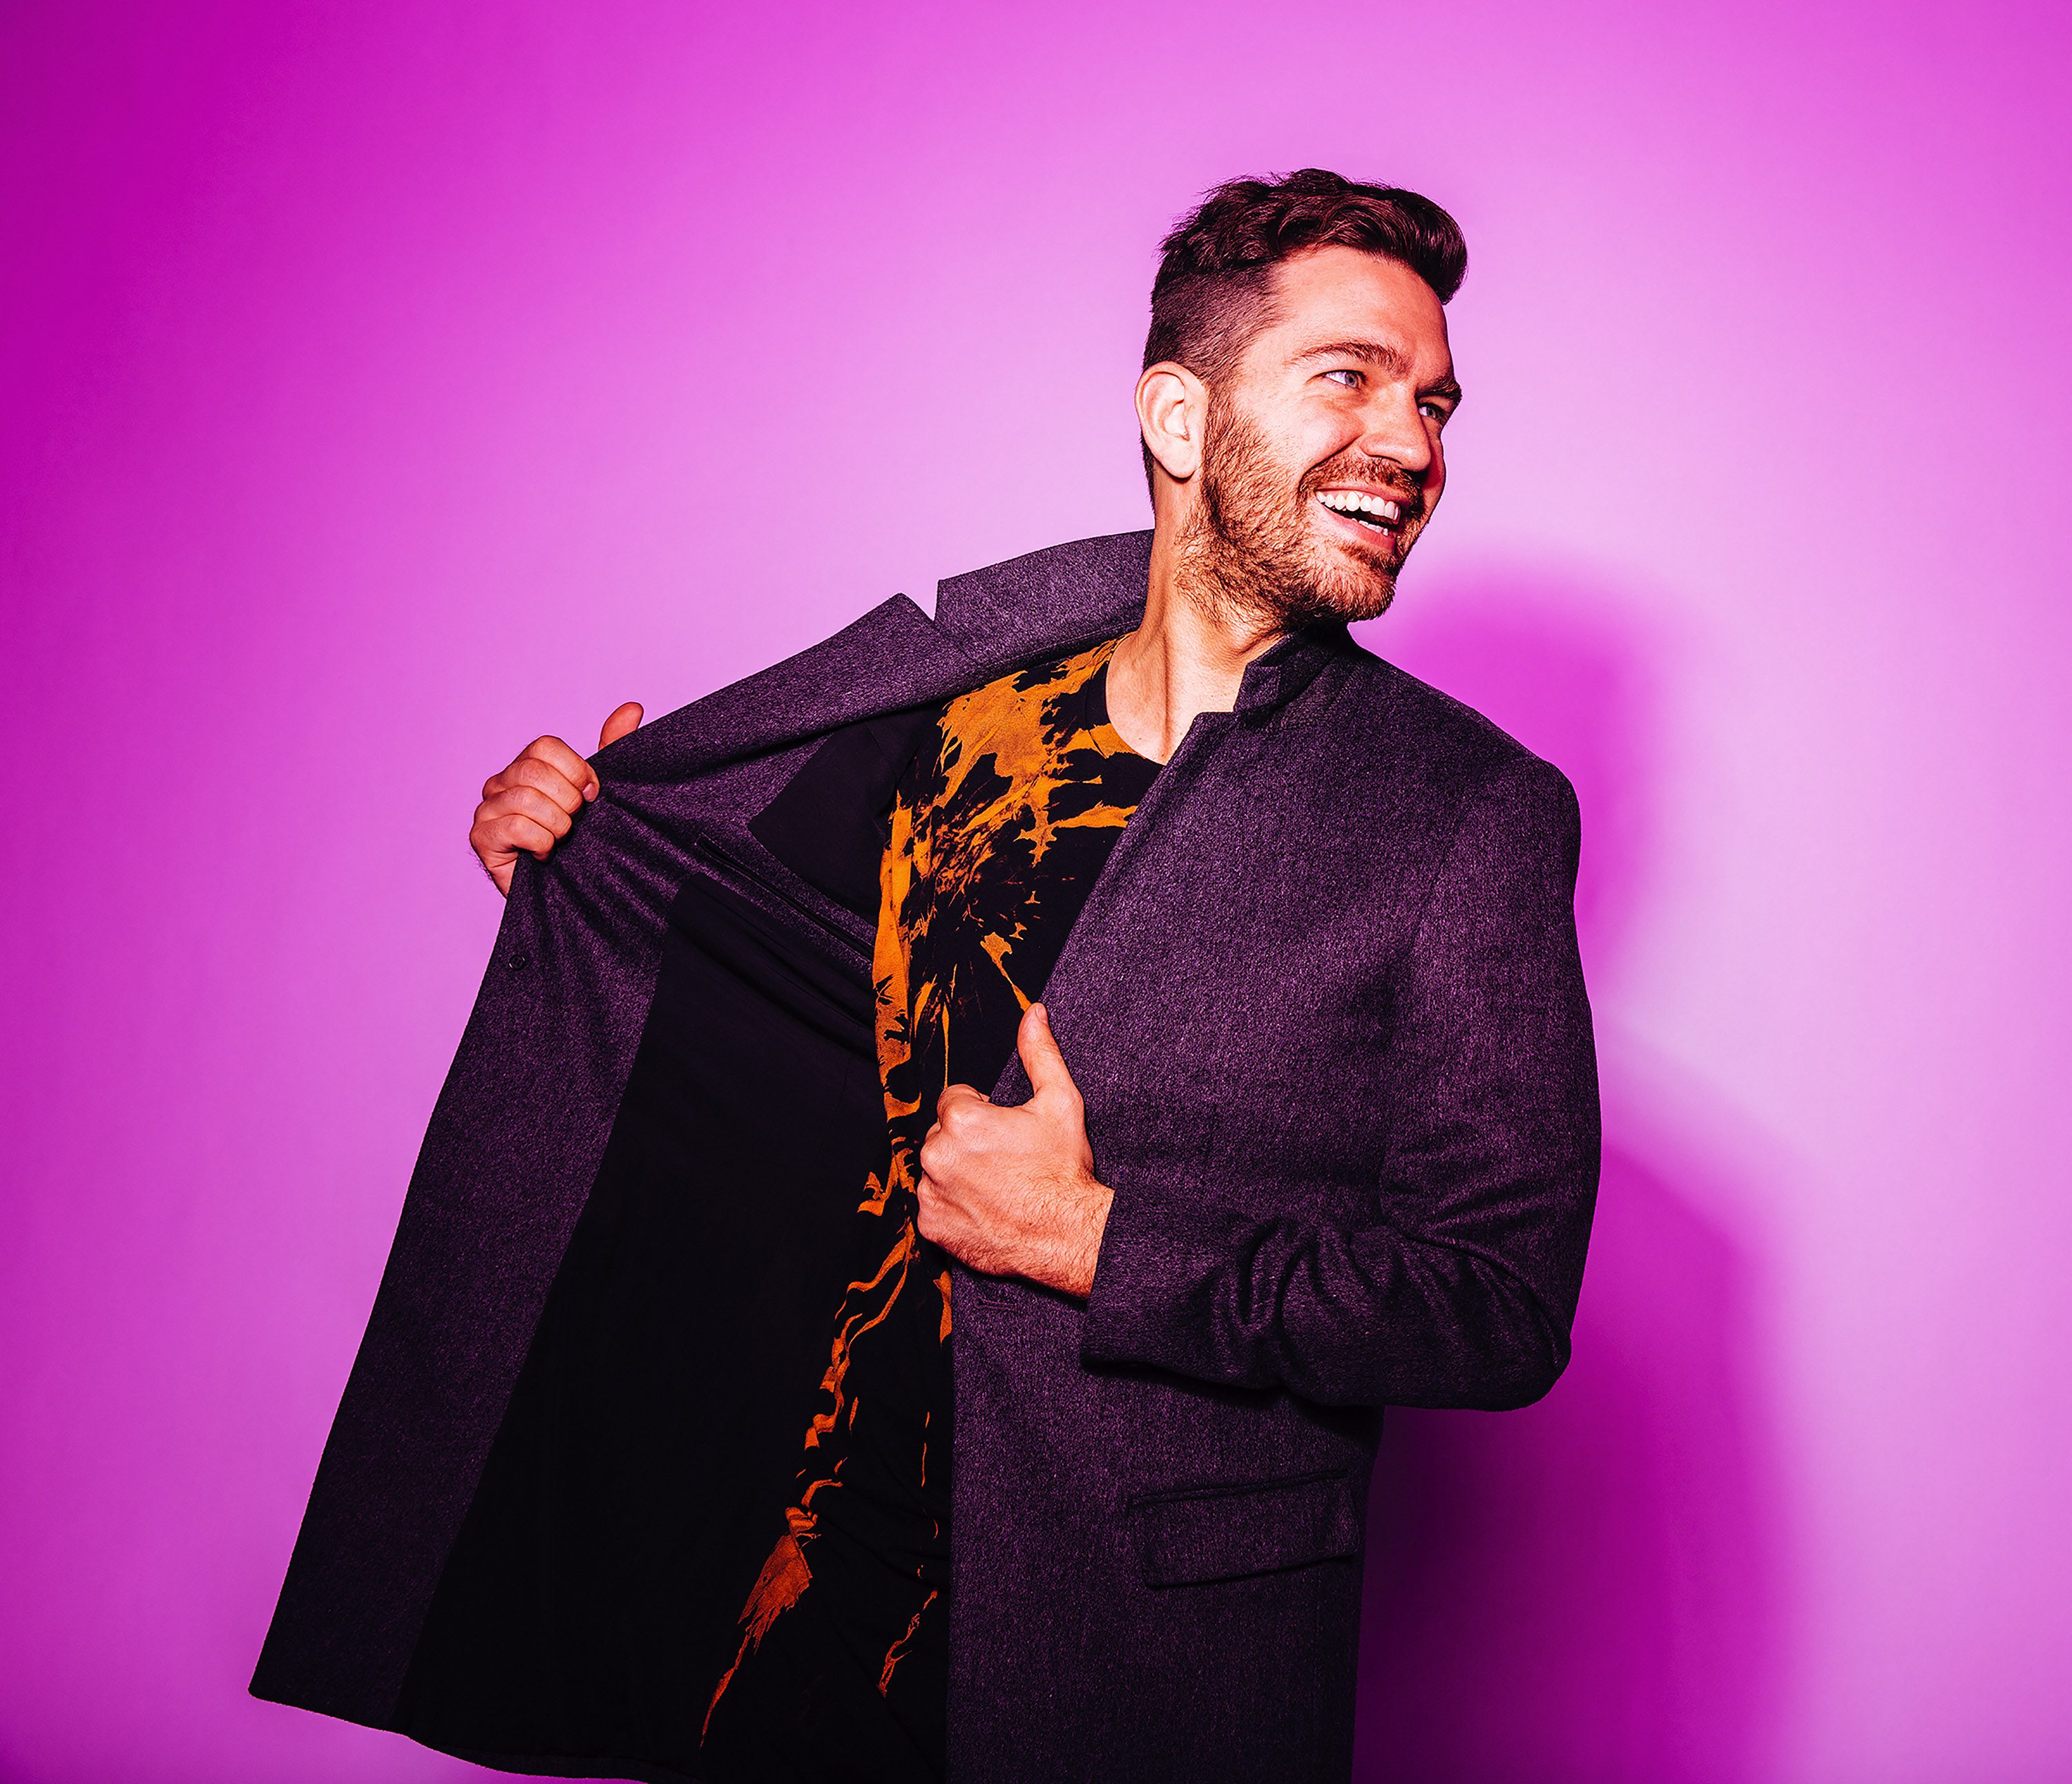 Andy Grammer to perform at the Chumash Casino on March 16